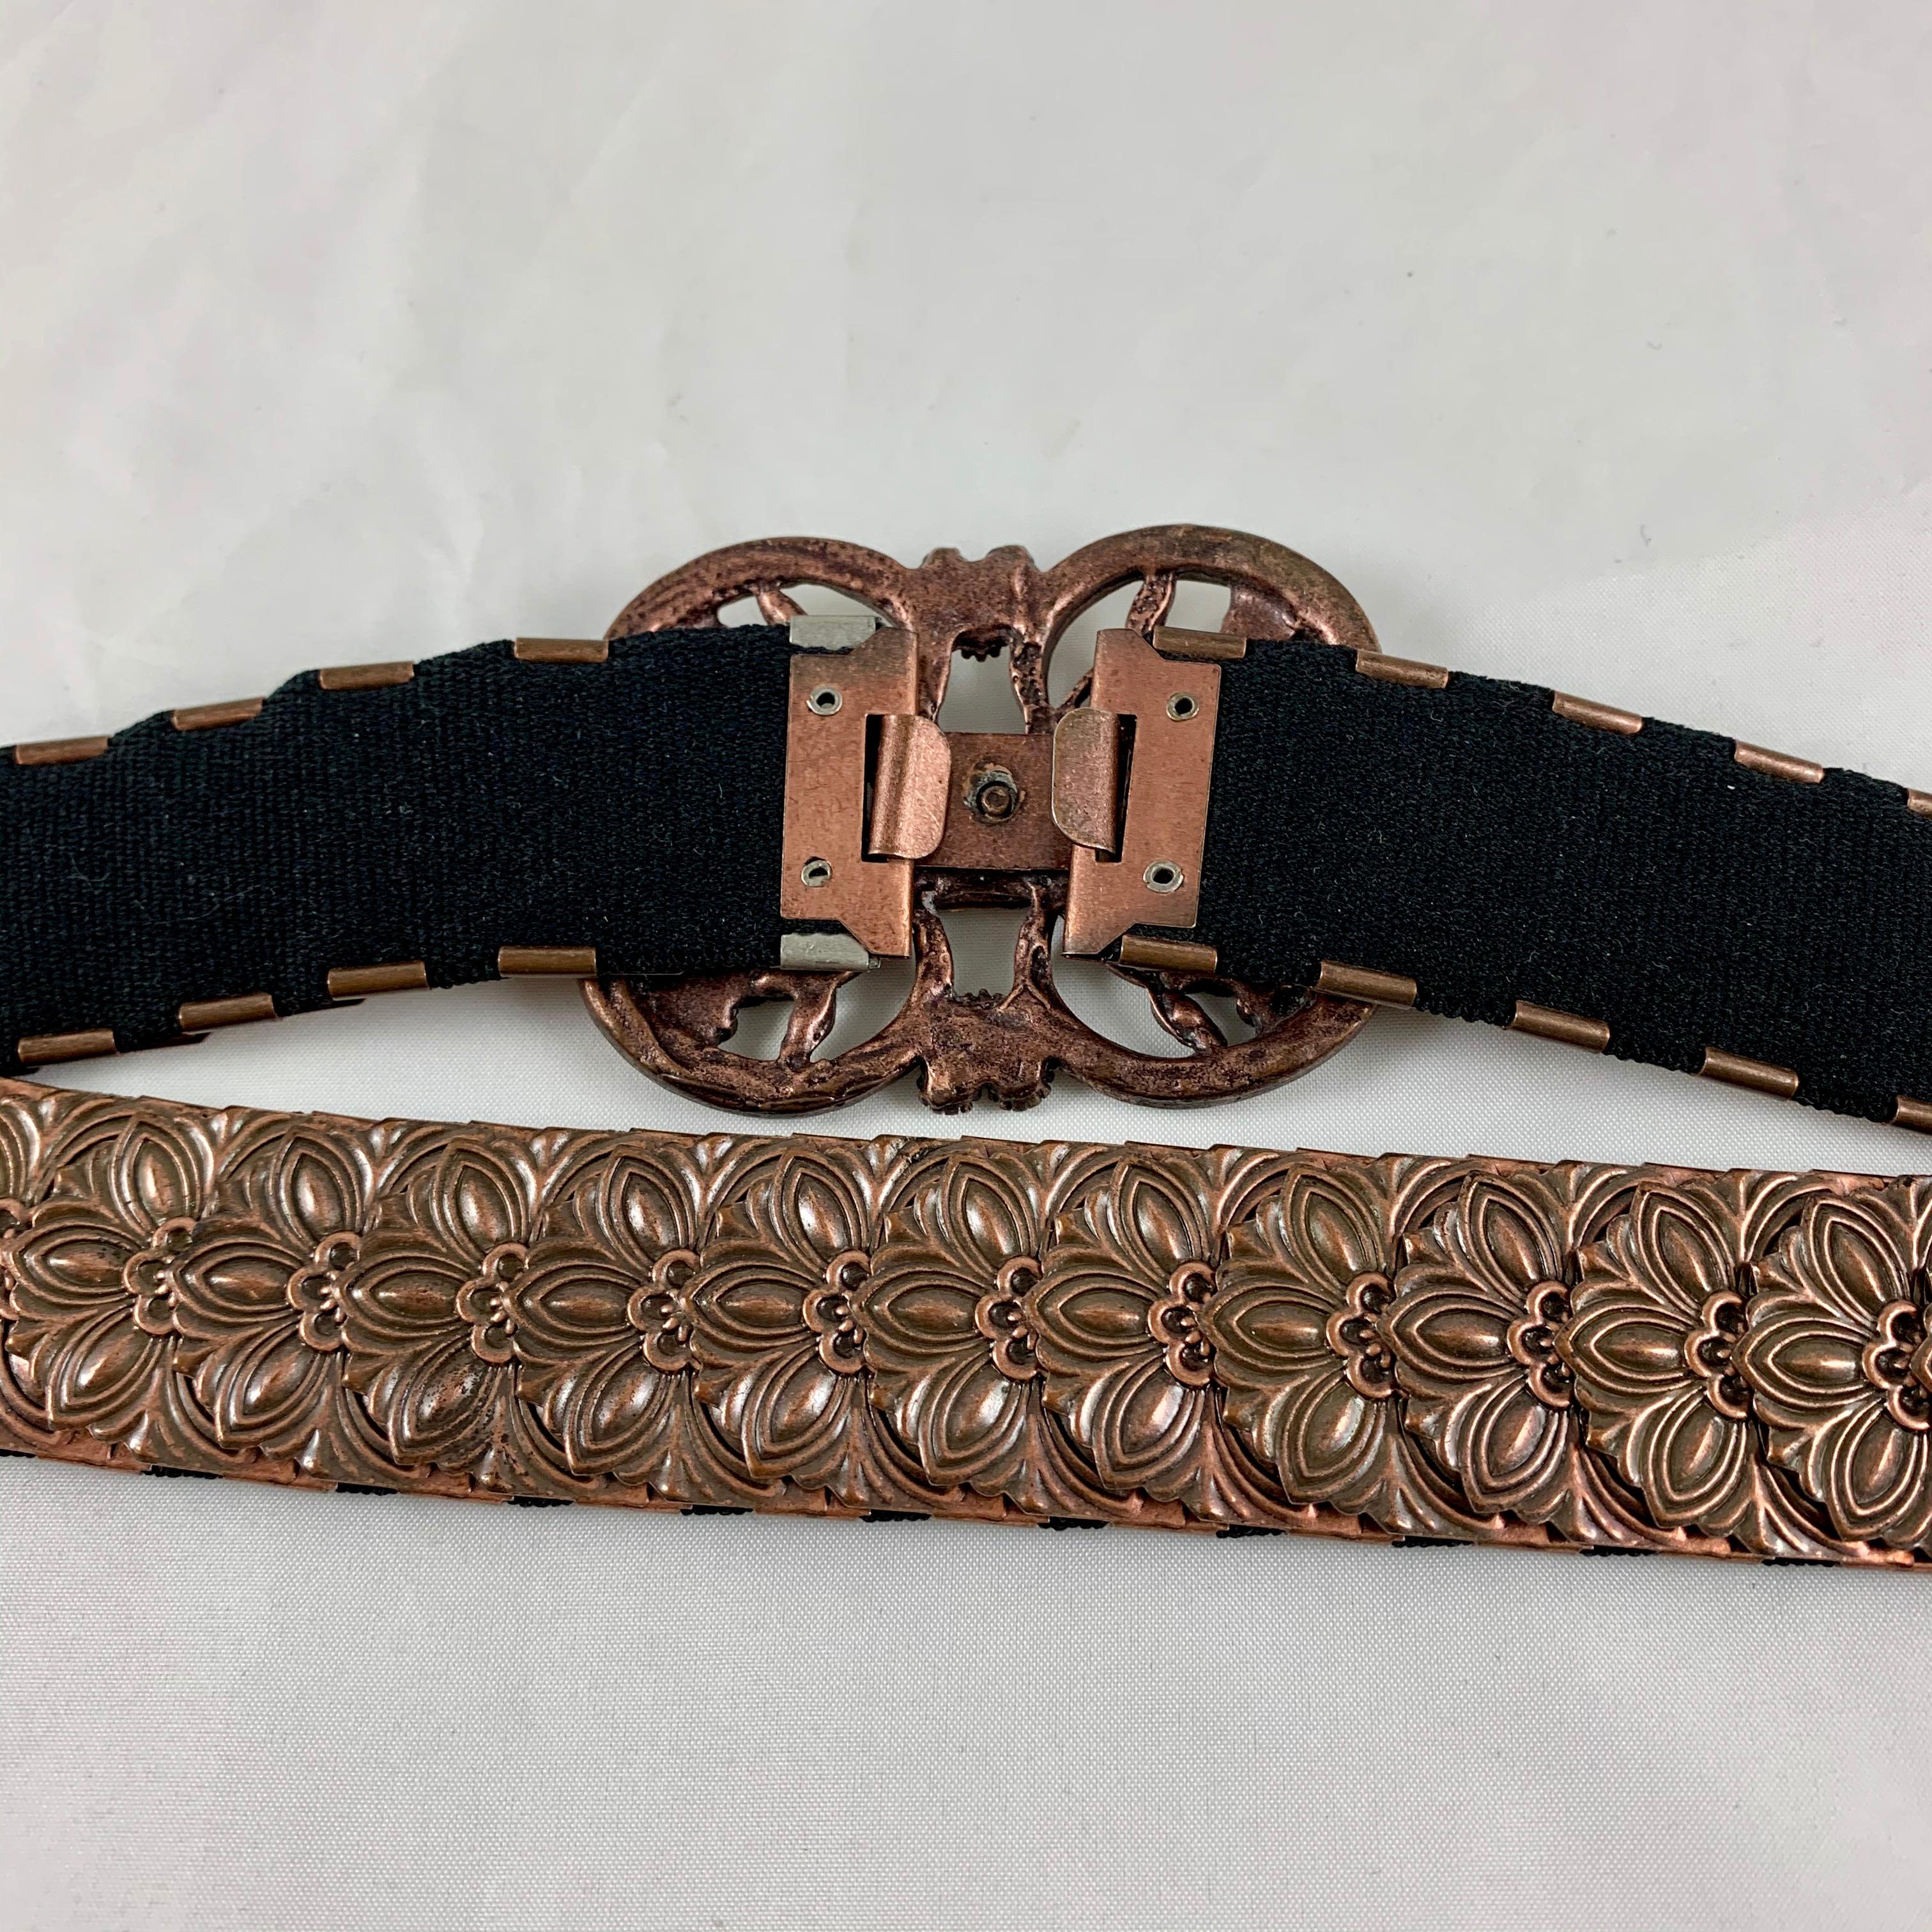 1970s Era Copper-Tone Snake Scale Metal and Crystal Jeweled Buckle Handmade Belt For Sale 6